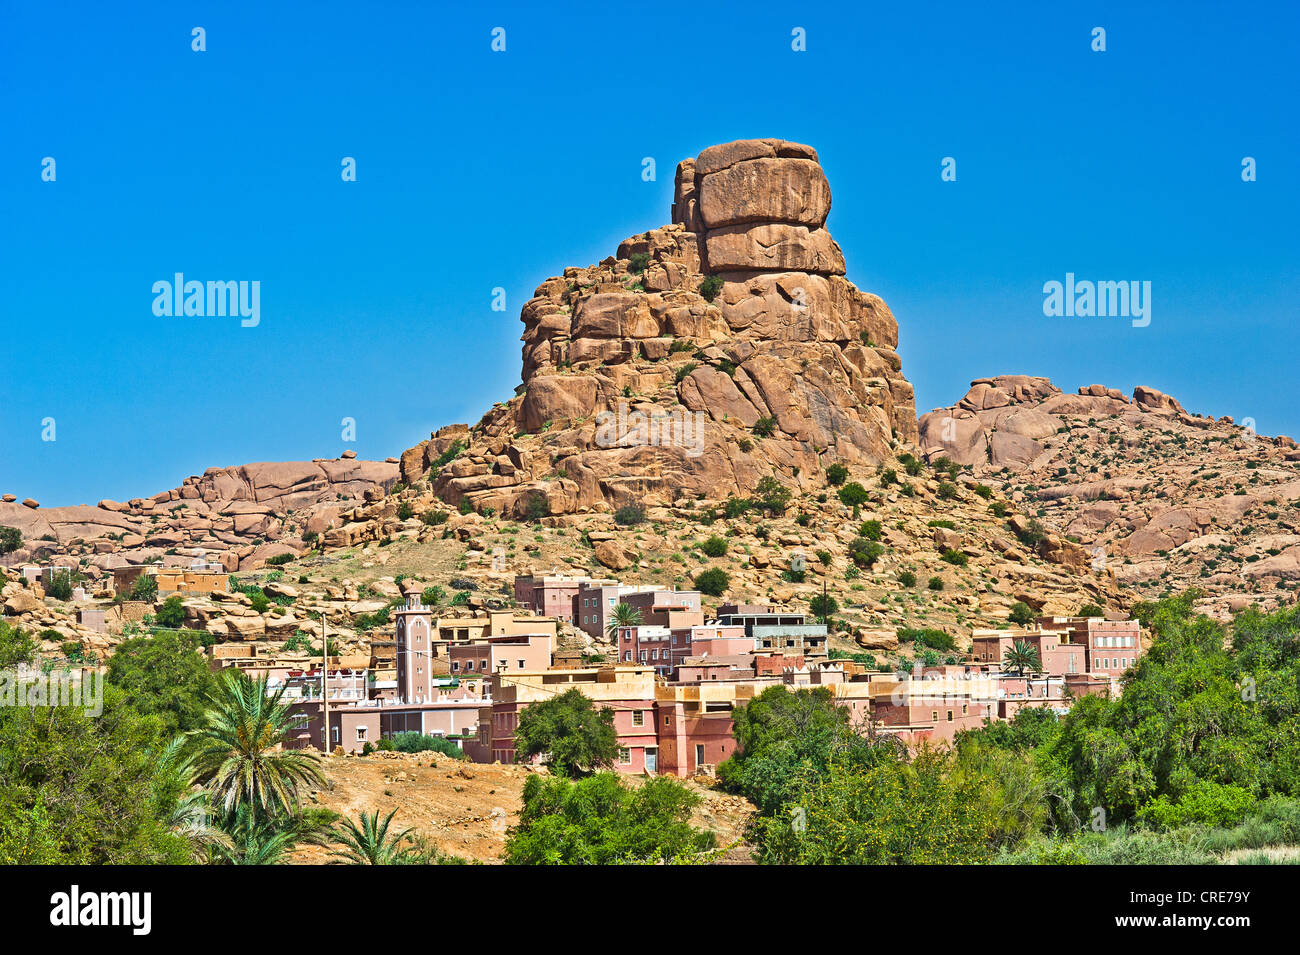 Small village of Aguard Ouda with a mosque in front of the Chapeau Napoleon or Napoleon's hat rock formation, Tafraoute Stock Photo